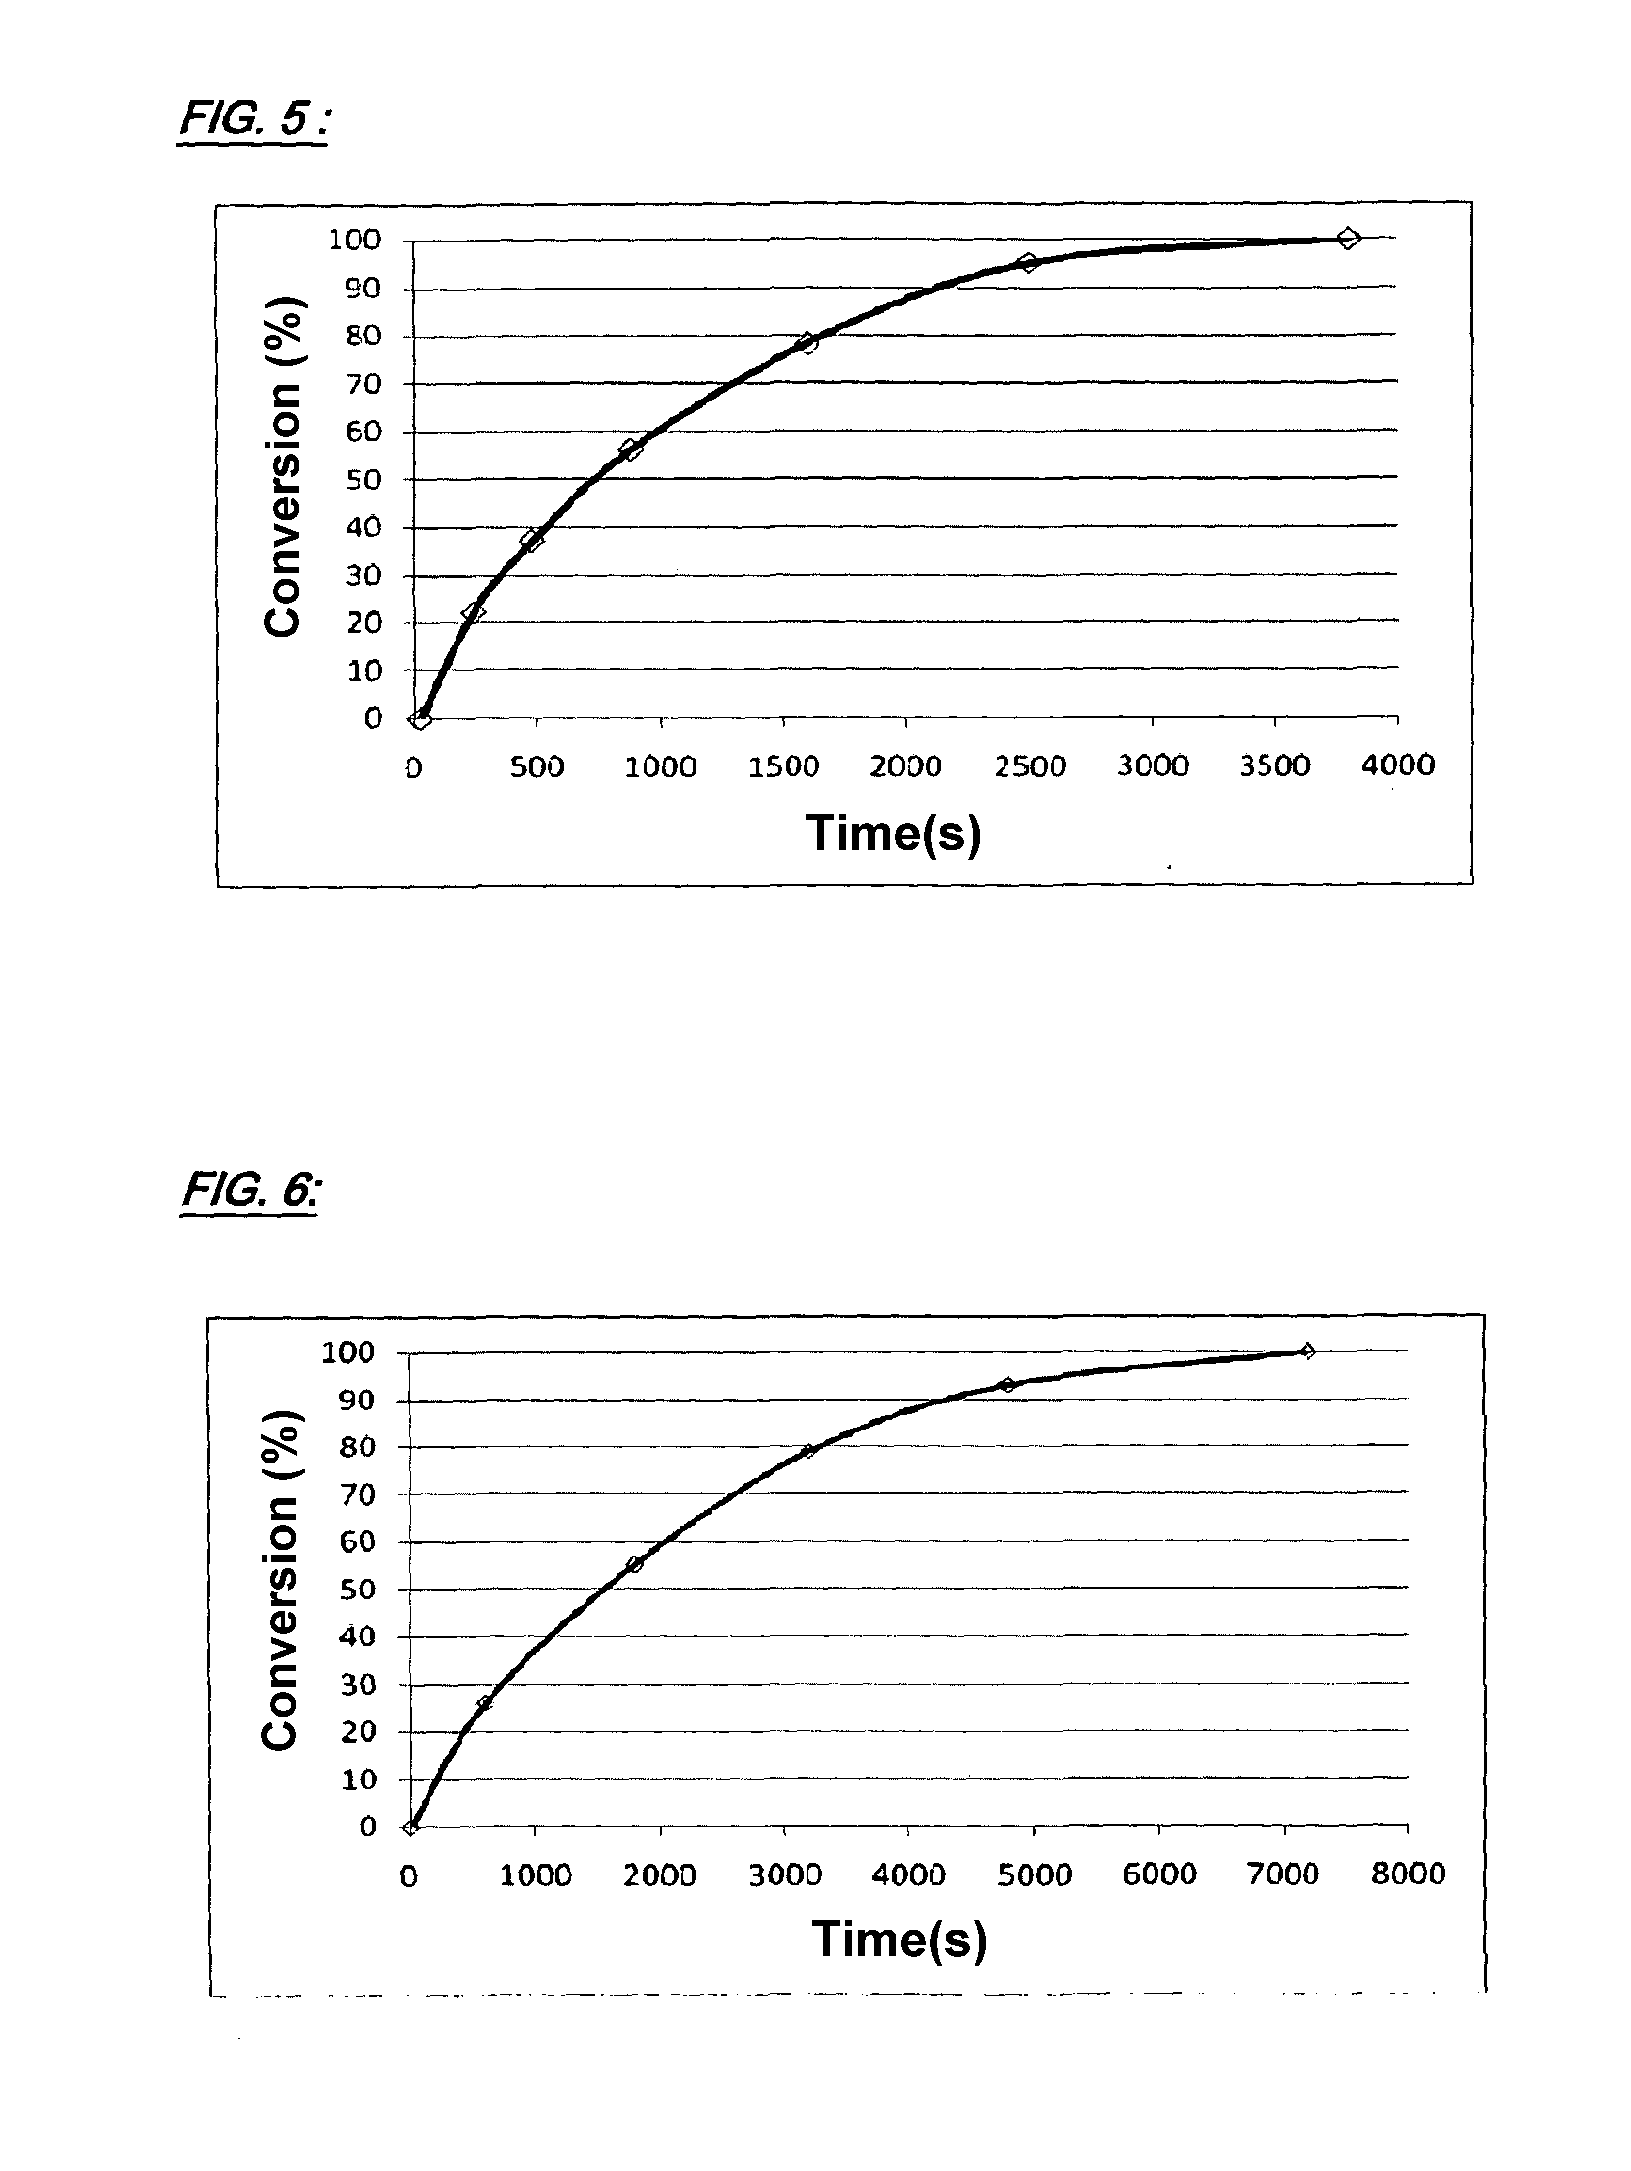 Method for preparing a compound comprising at least one beta-hydroxy-urethane unit and/or at least one upsilon-hydroxy-urethane unit